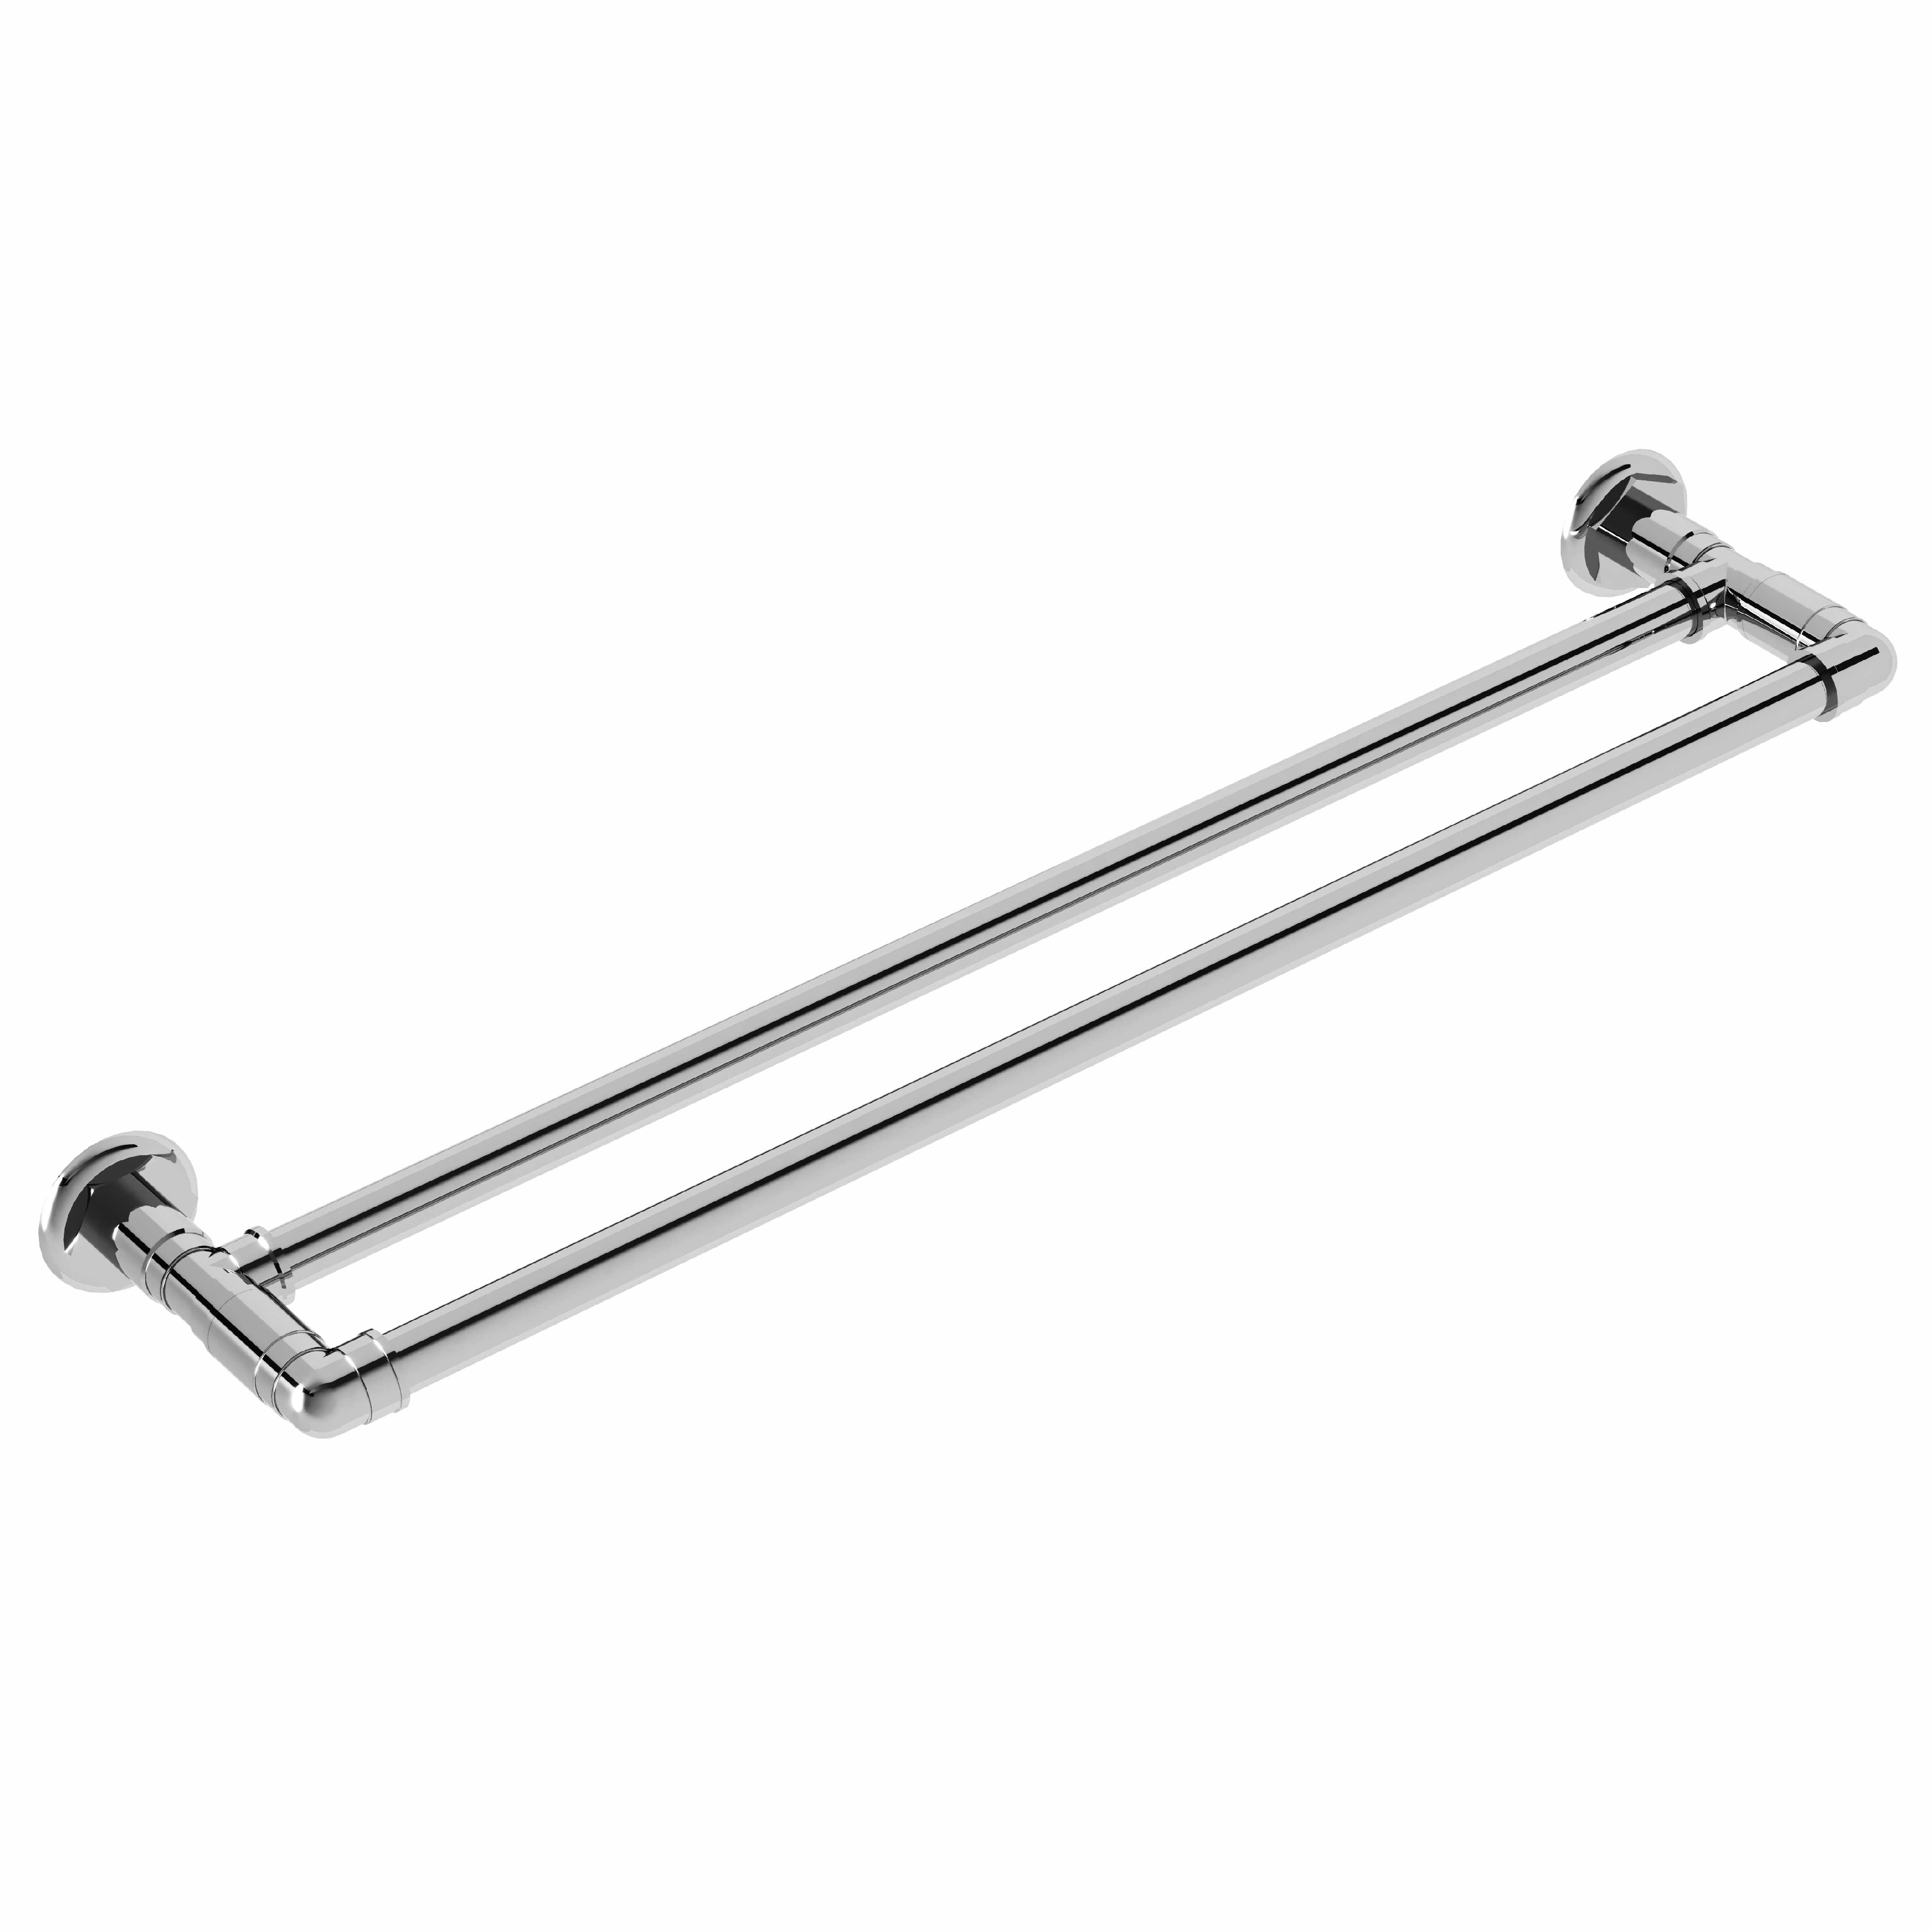 M81-509 Wall mounted double towel bar